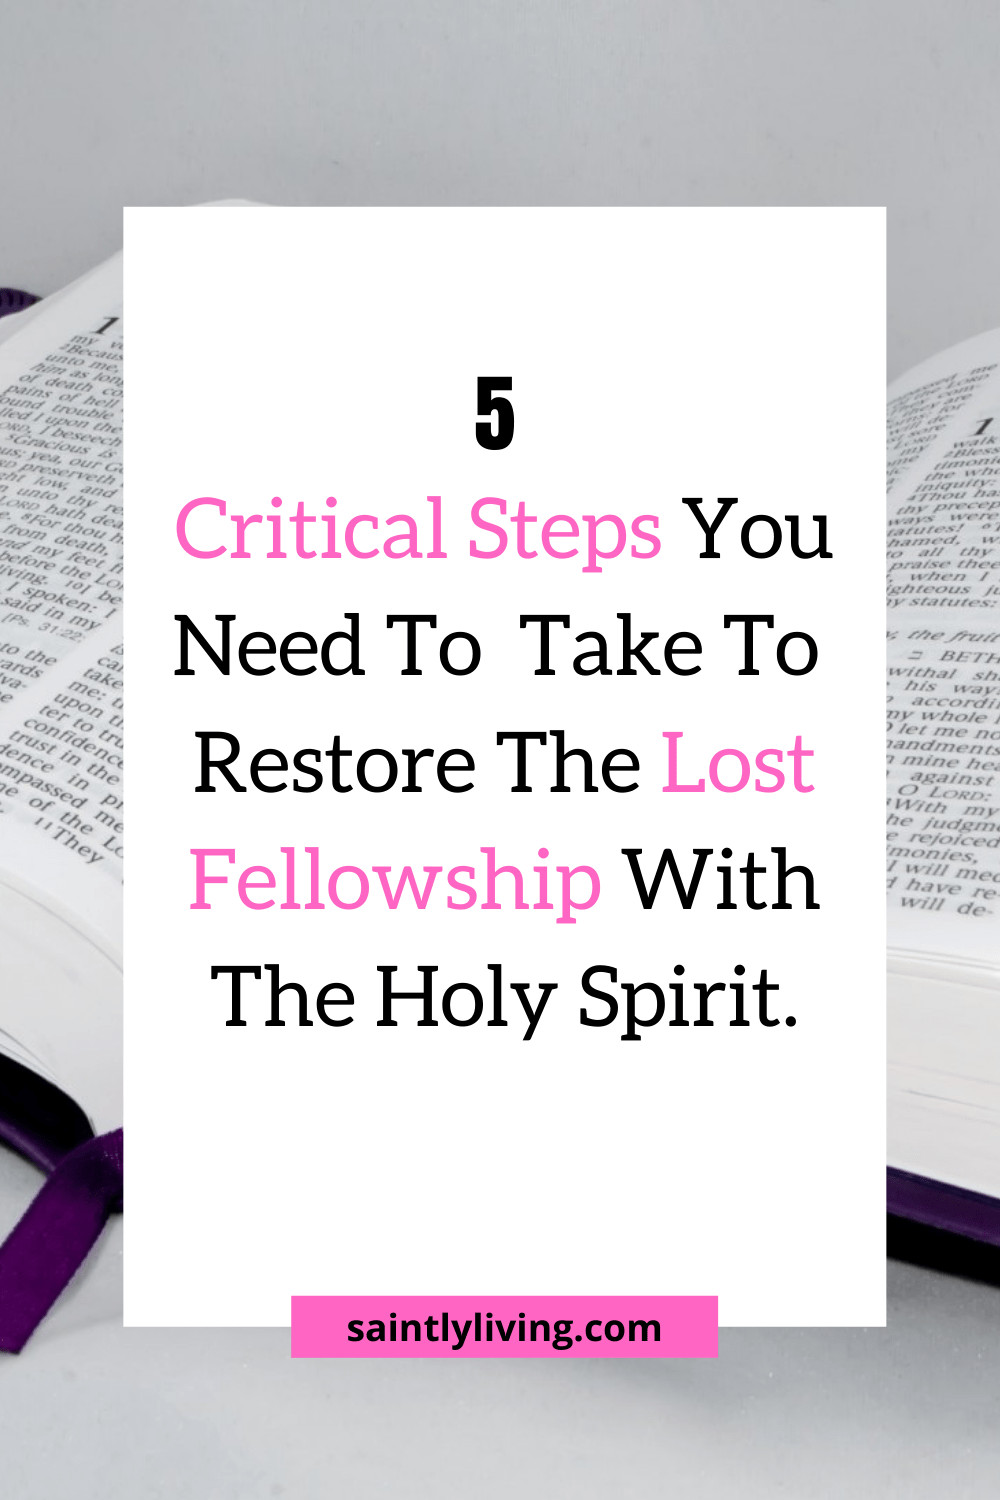 Fellowship-with-the-Holy-Spirit